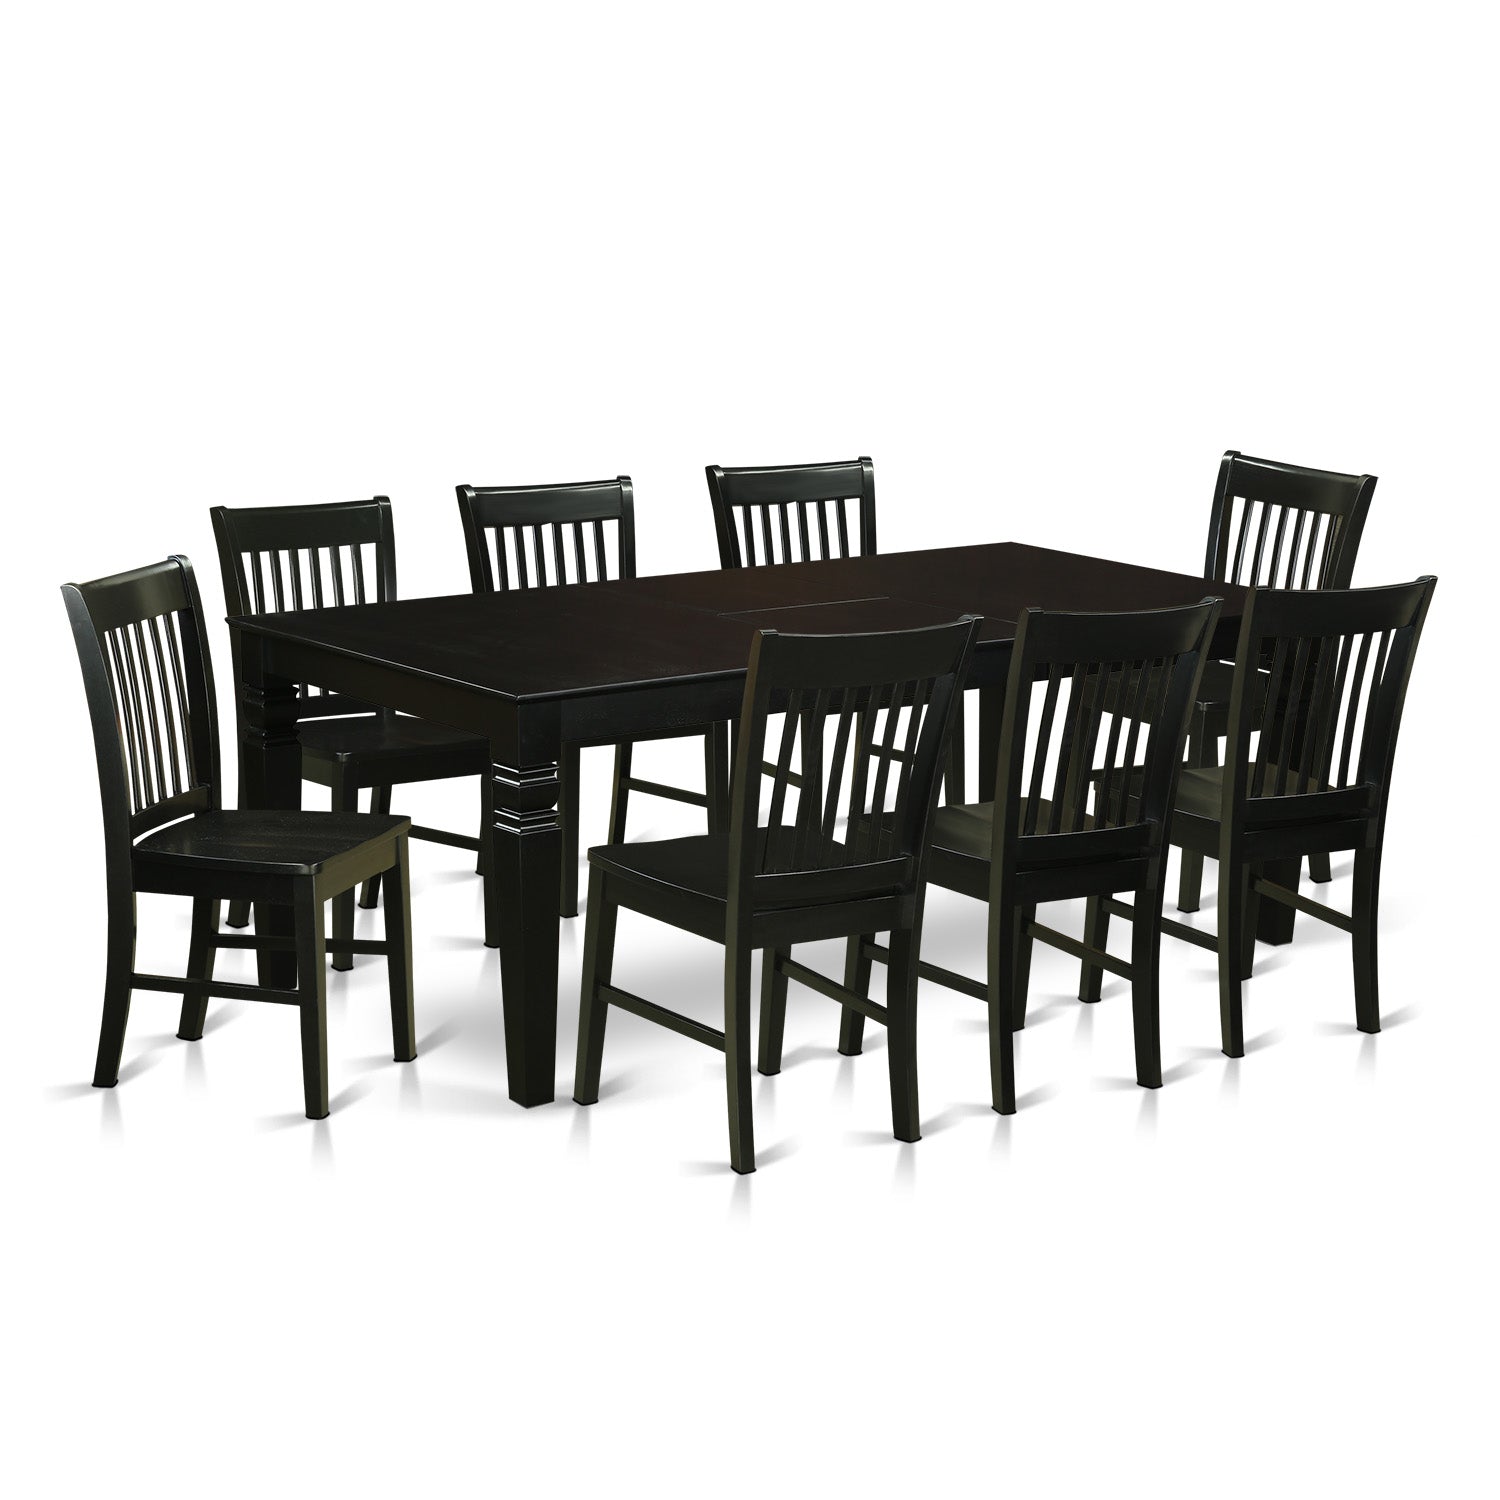 LGNO9-BLK-W 9 Pc Dining set with a Dining Table and 8 Wood Dining Chairs in Black